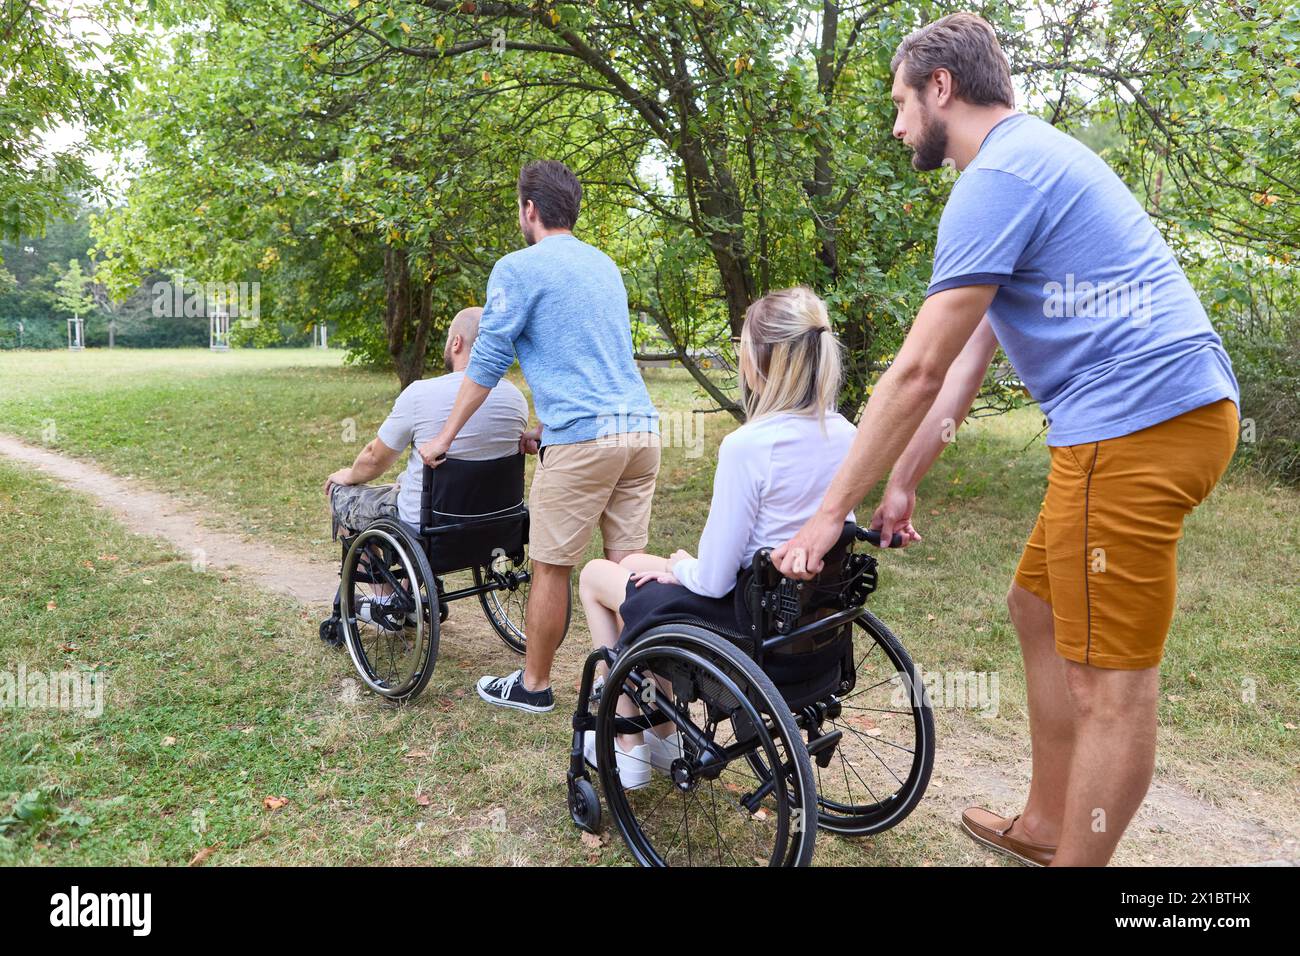 A heartwarming scene of four friends, including two using wheelchairs, spending quality time together outdoors in a lush green park. Stock Photo